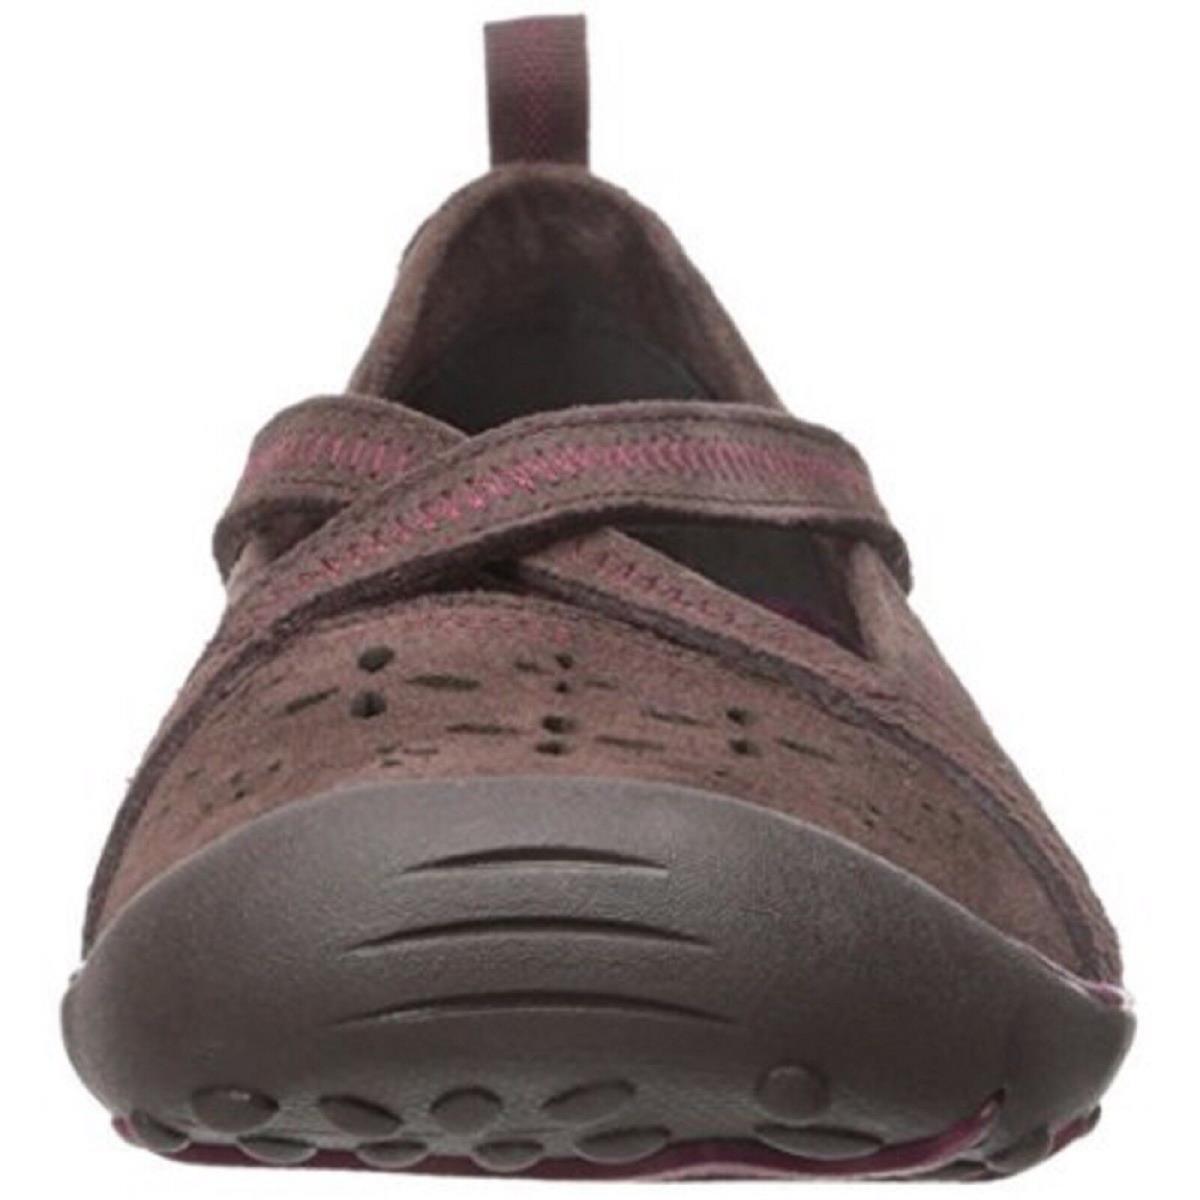 Skechers shoes Earth Fest - Chocolate 2